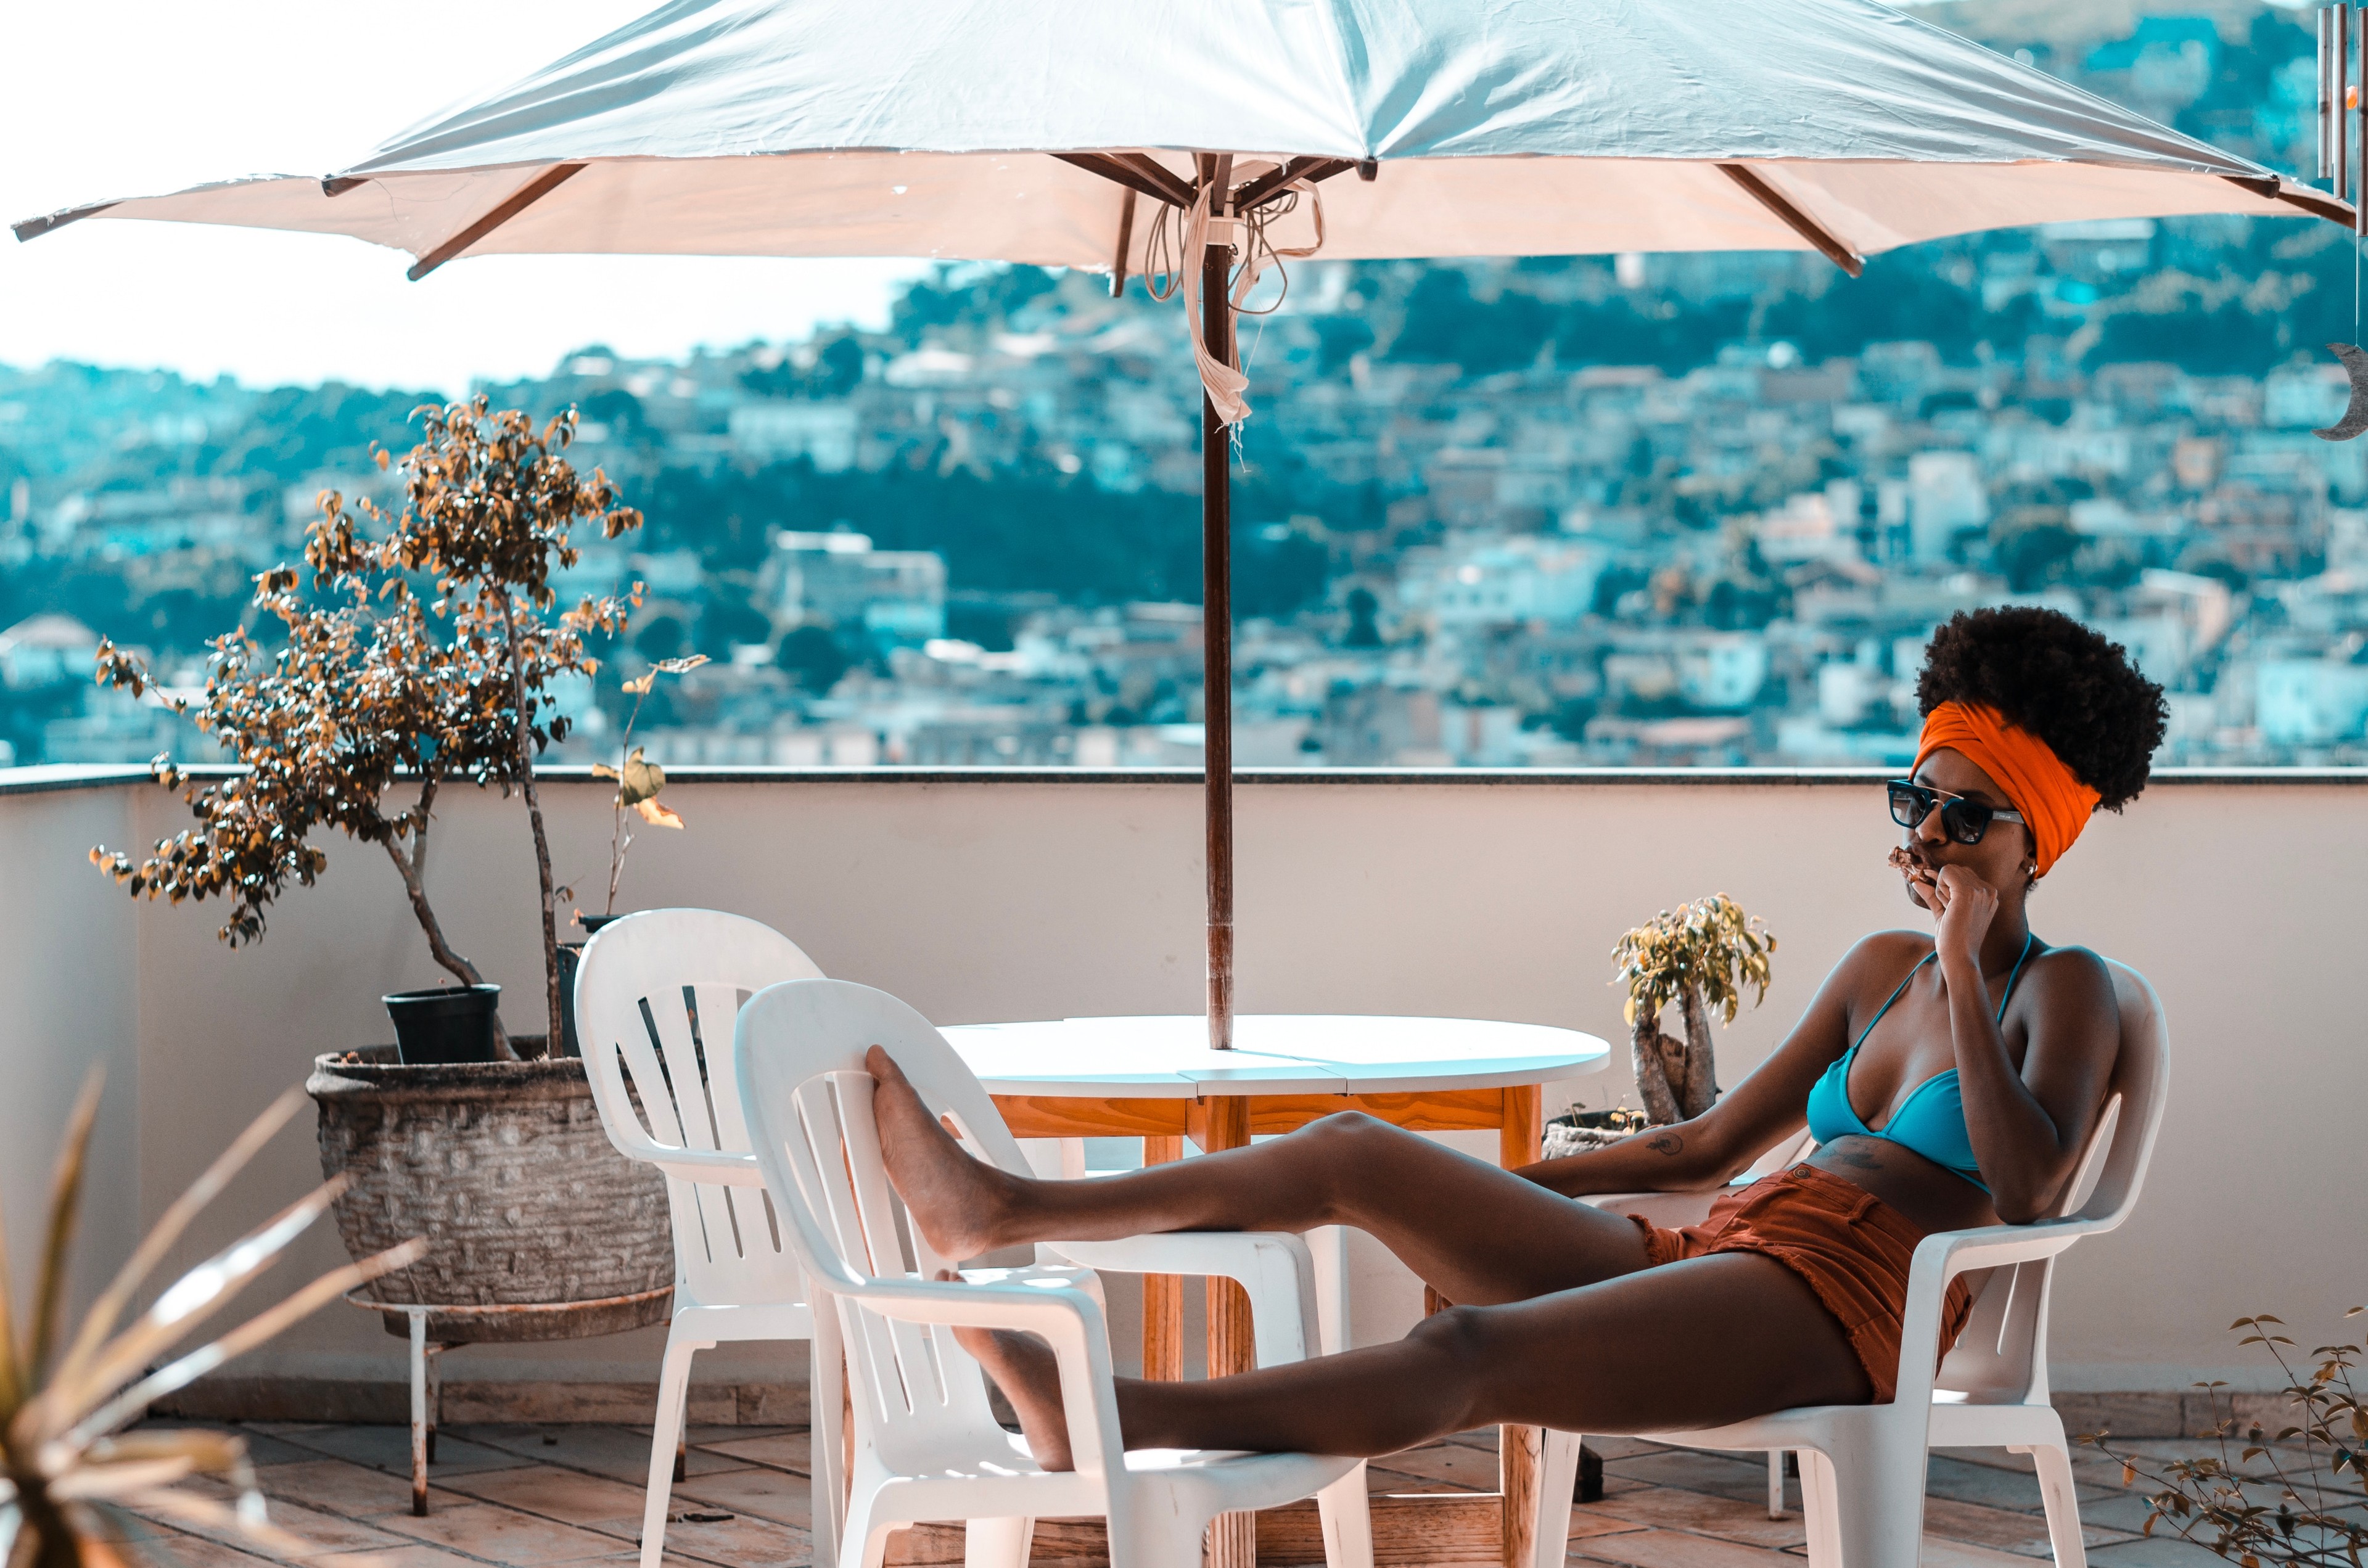 black woman with natural hair sitting in chair outside on vacation